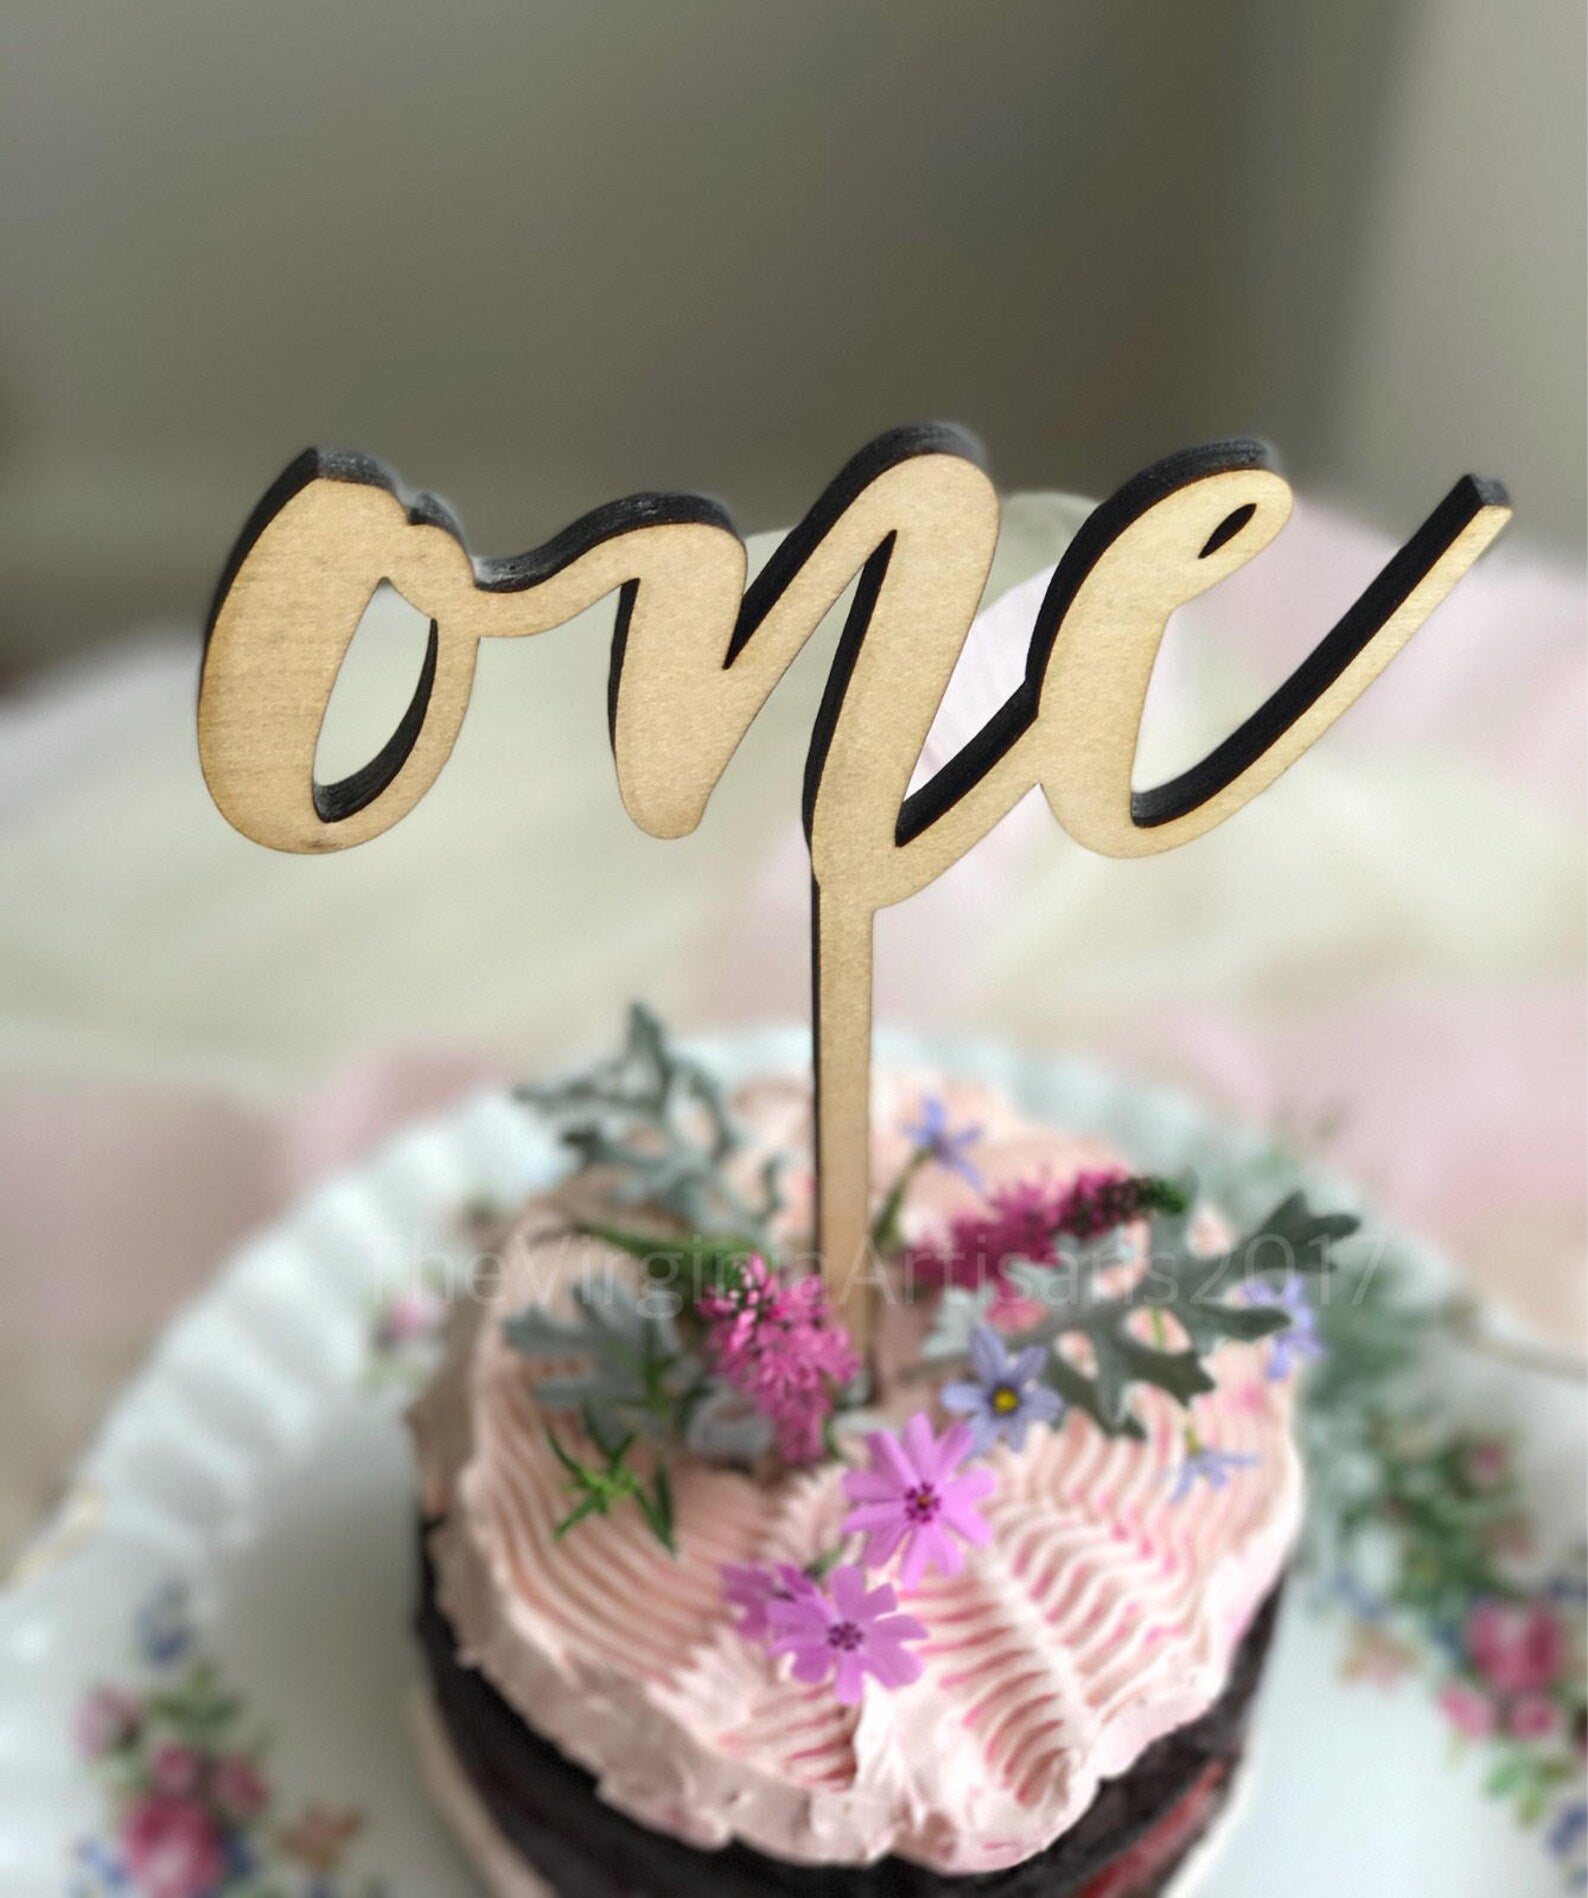 SWEETTALA 12 Way to One Cake Topper - Happy 6 Months Cake India | Ubuy